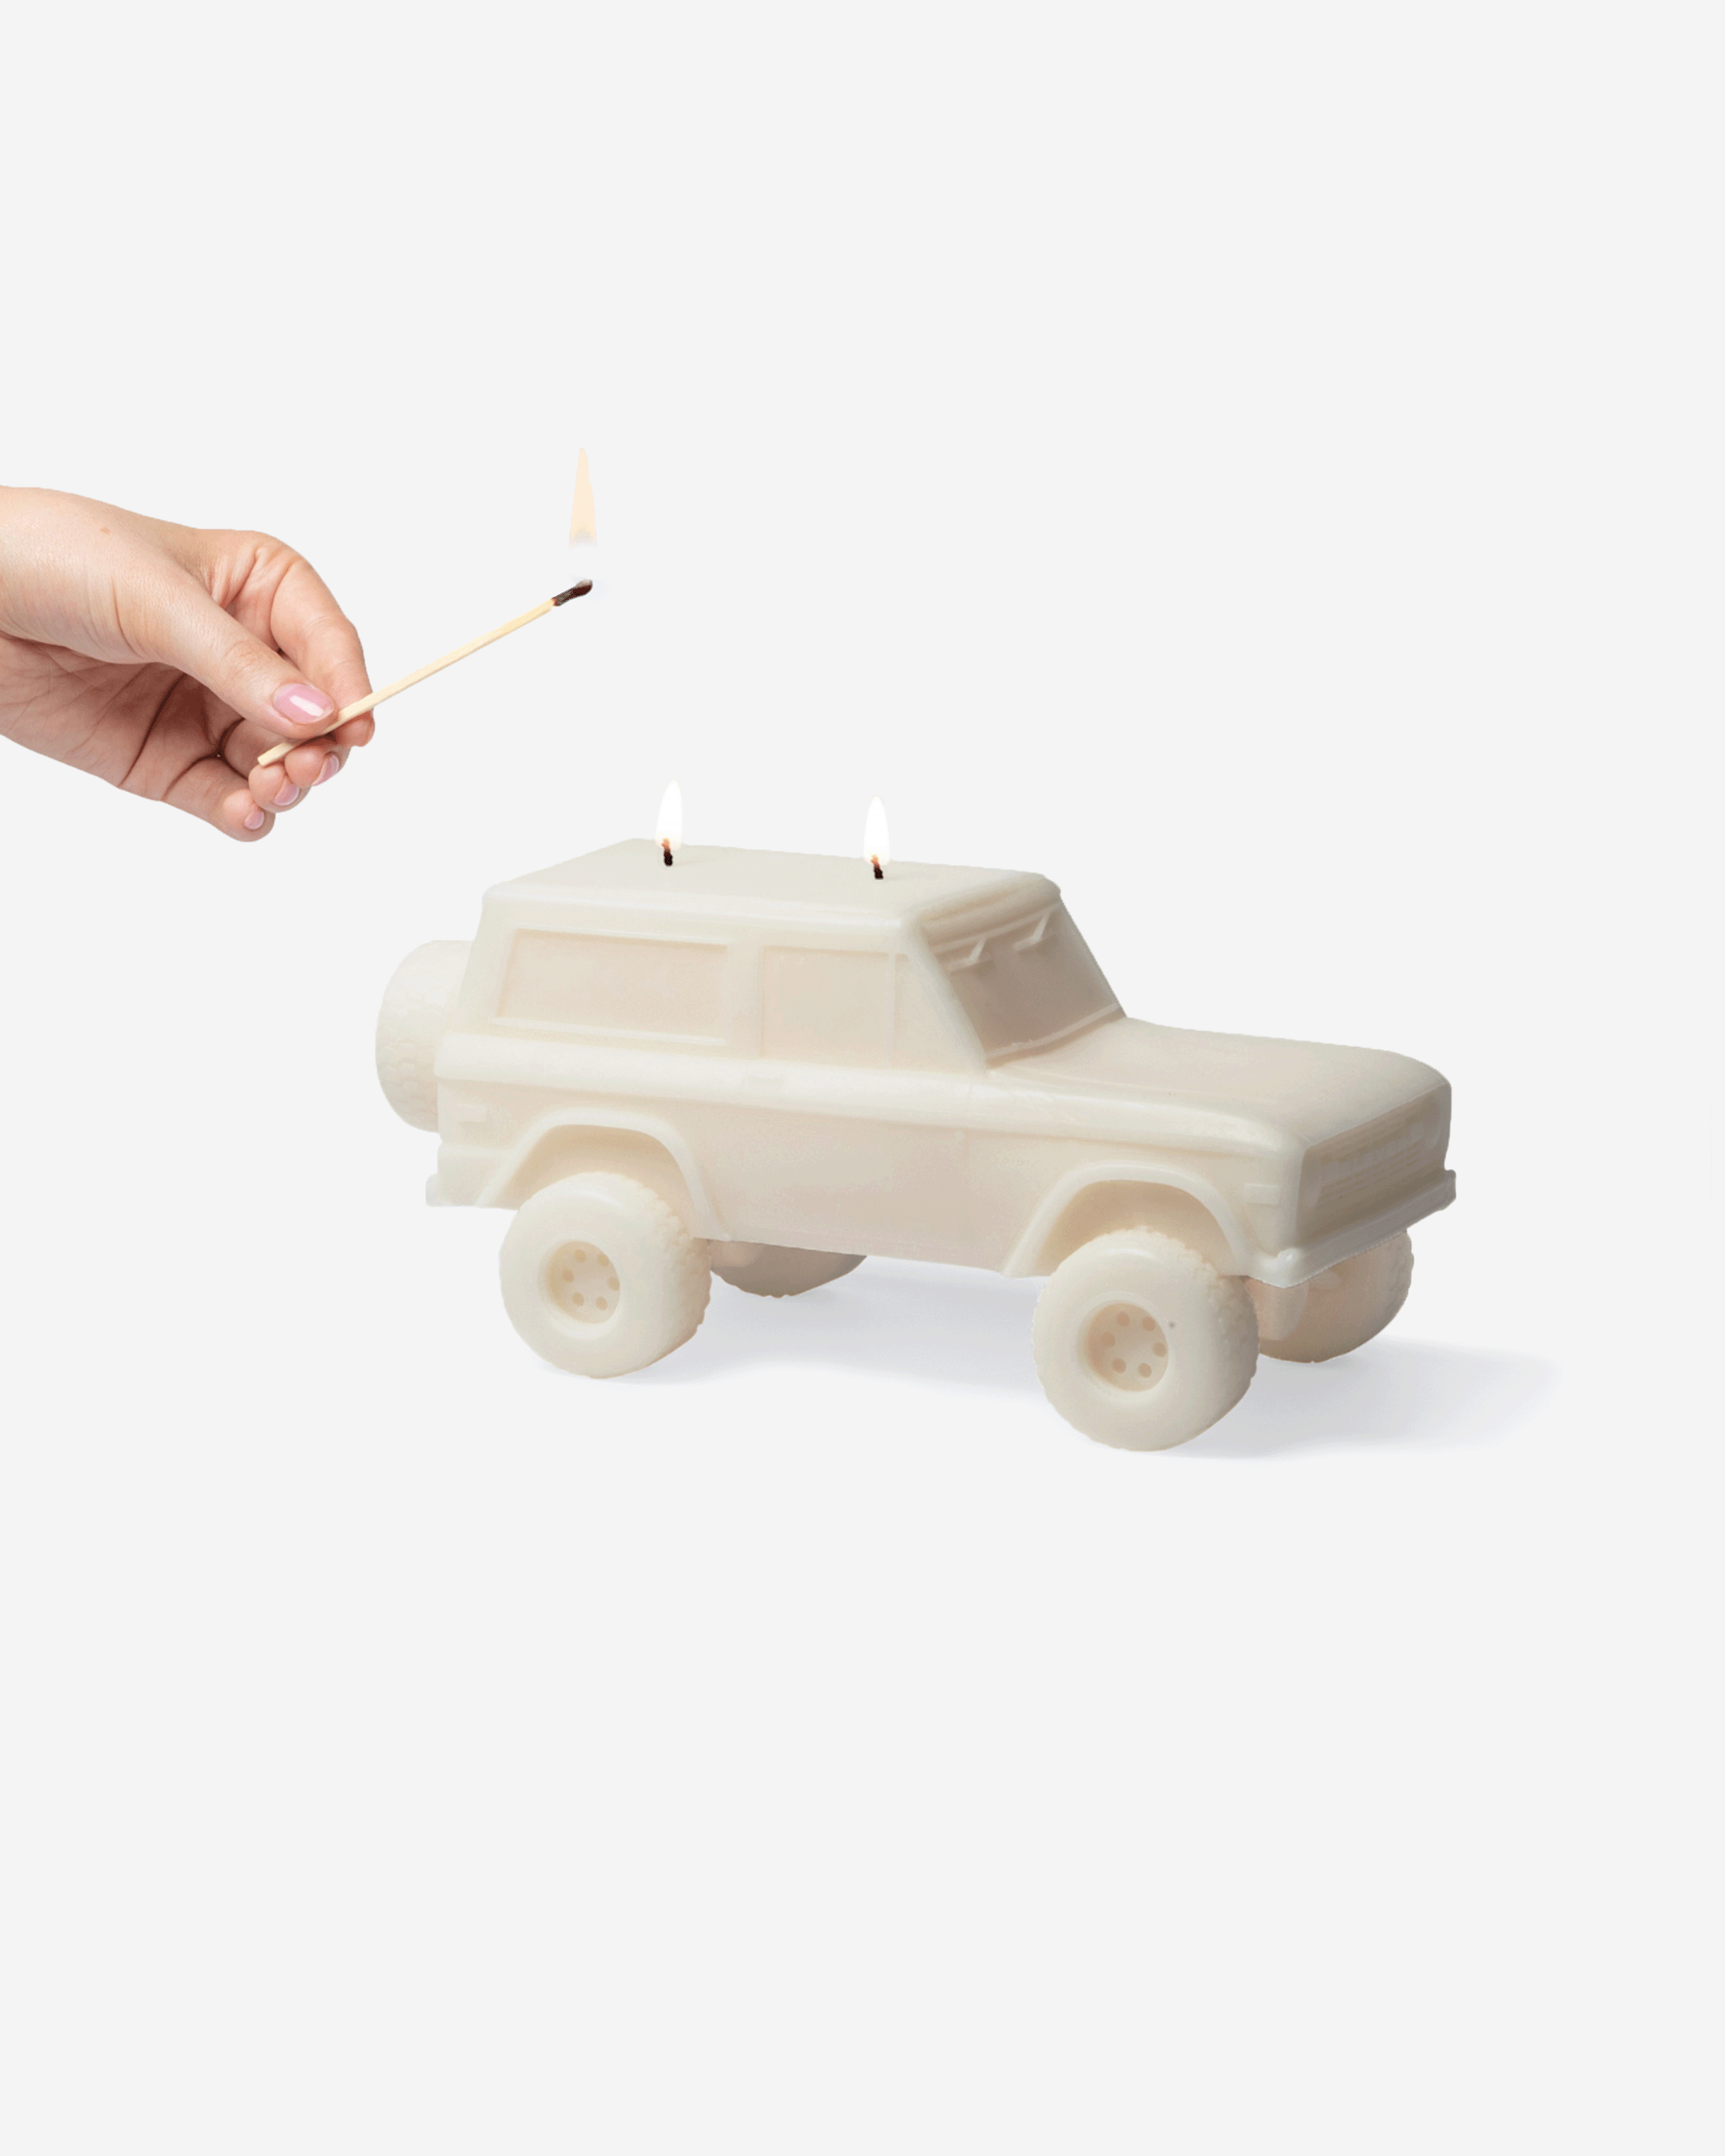 Horsepower Candle (Off-White)